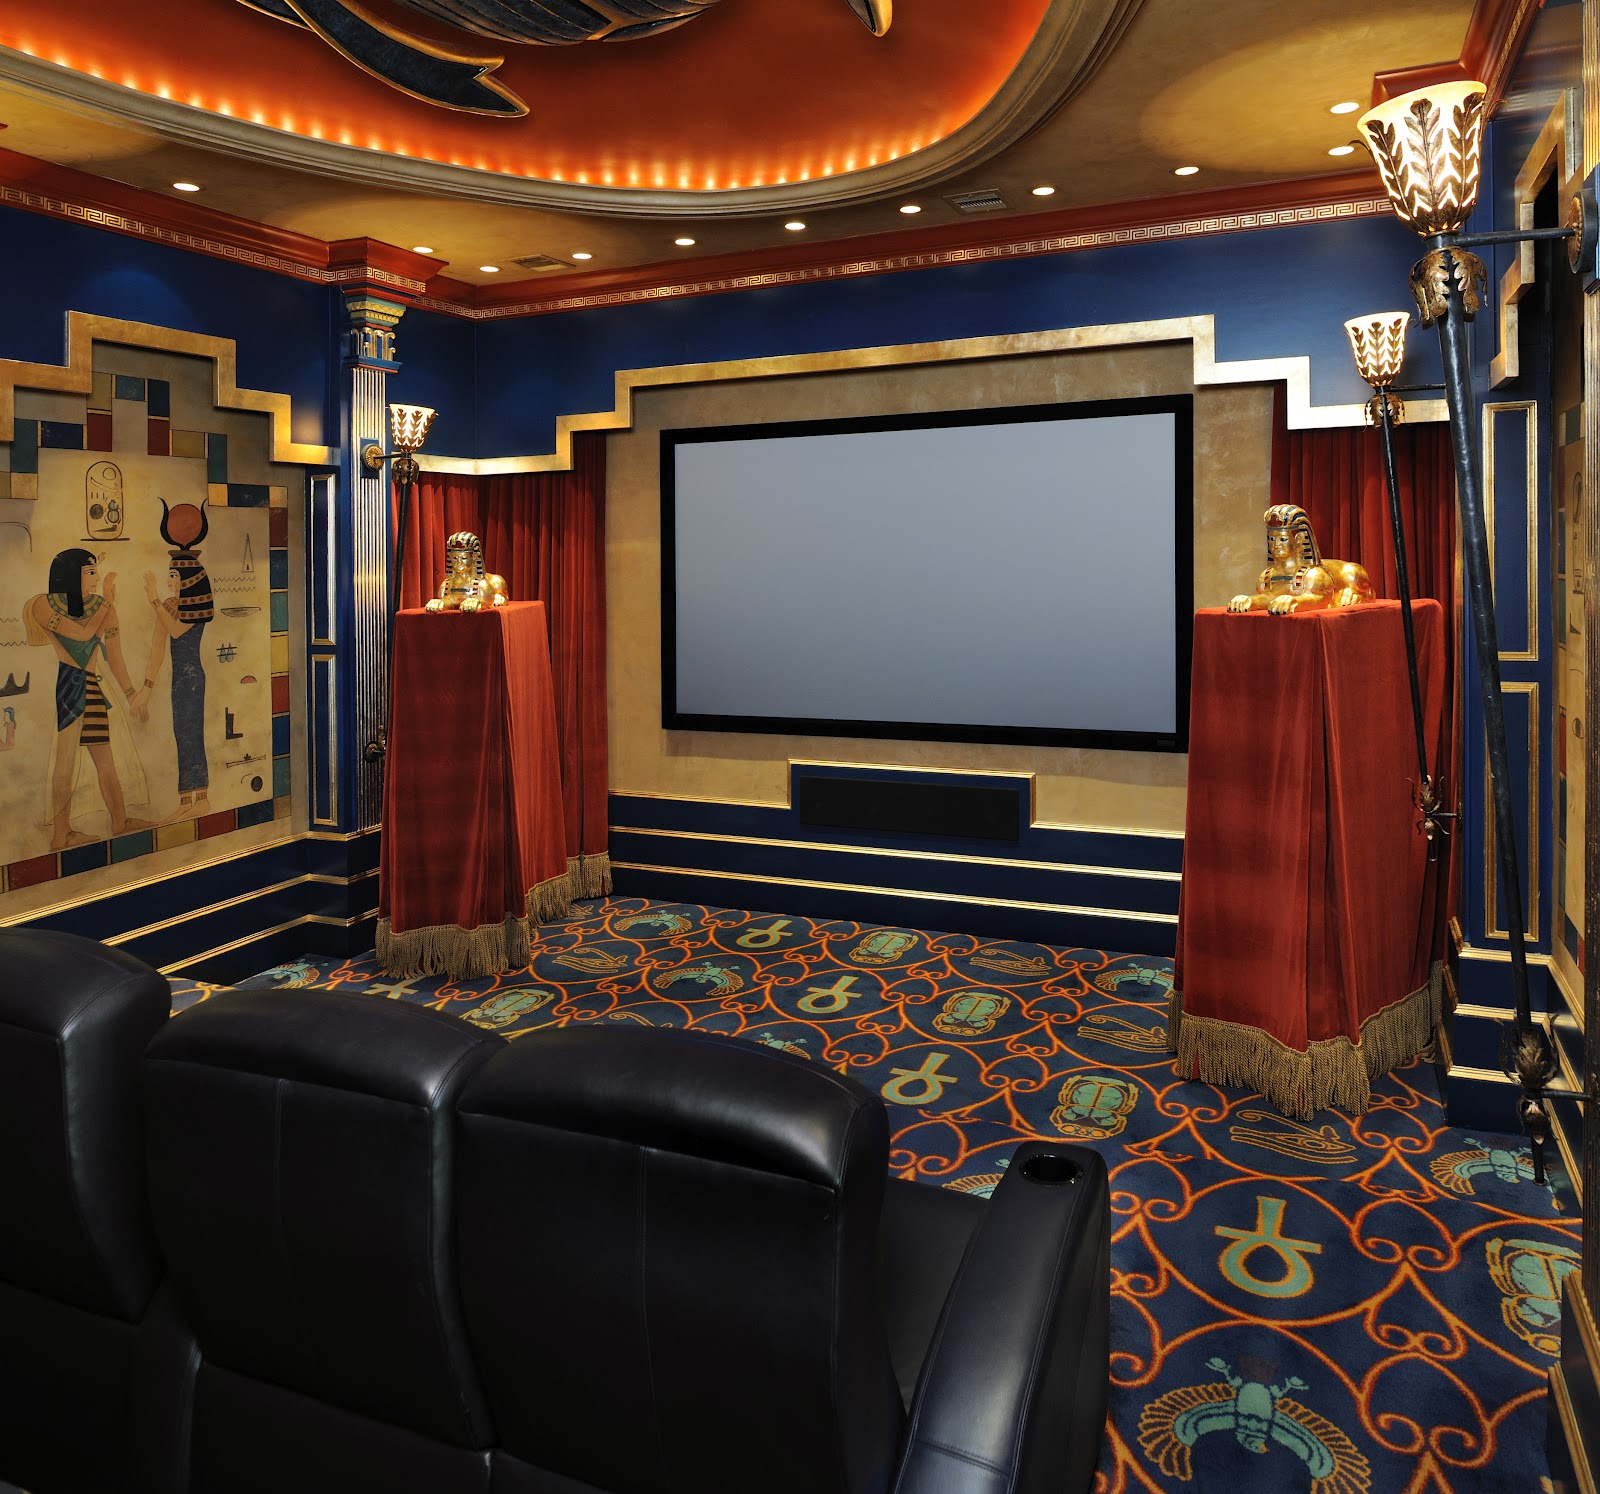  Home Theater Design Cost for Small Space